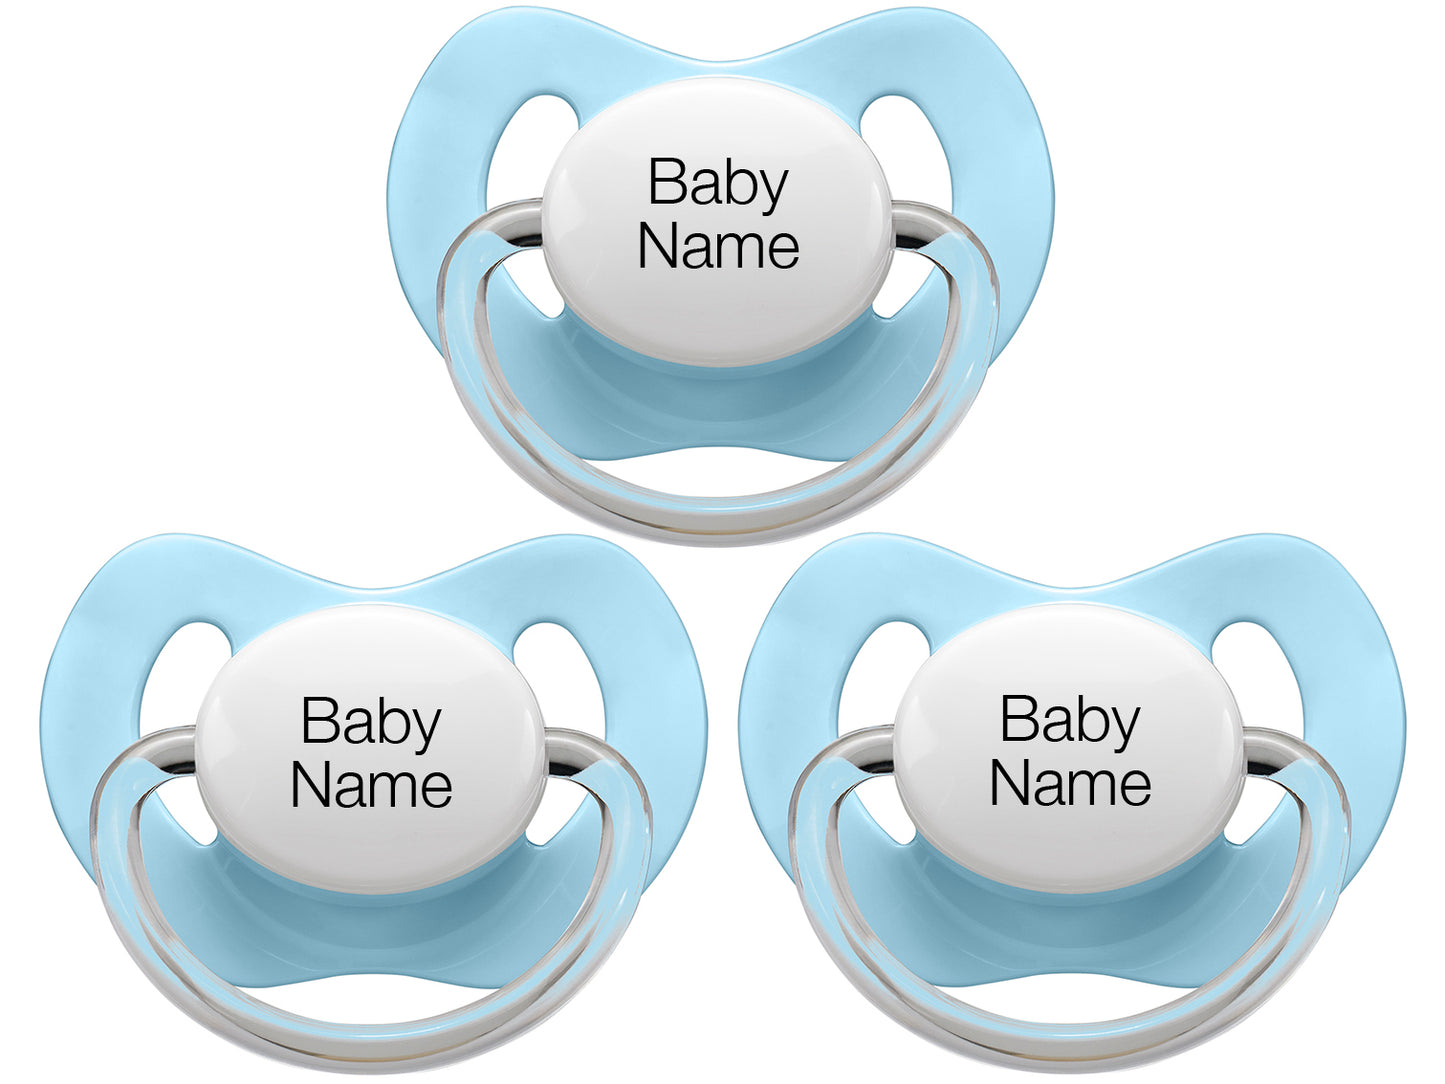 Personalised Pacifiers 3 pcs.  - Blue